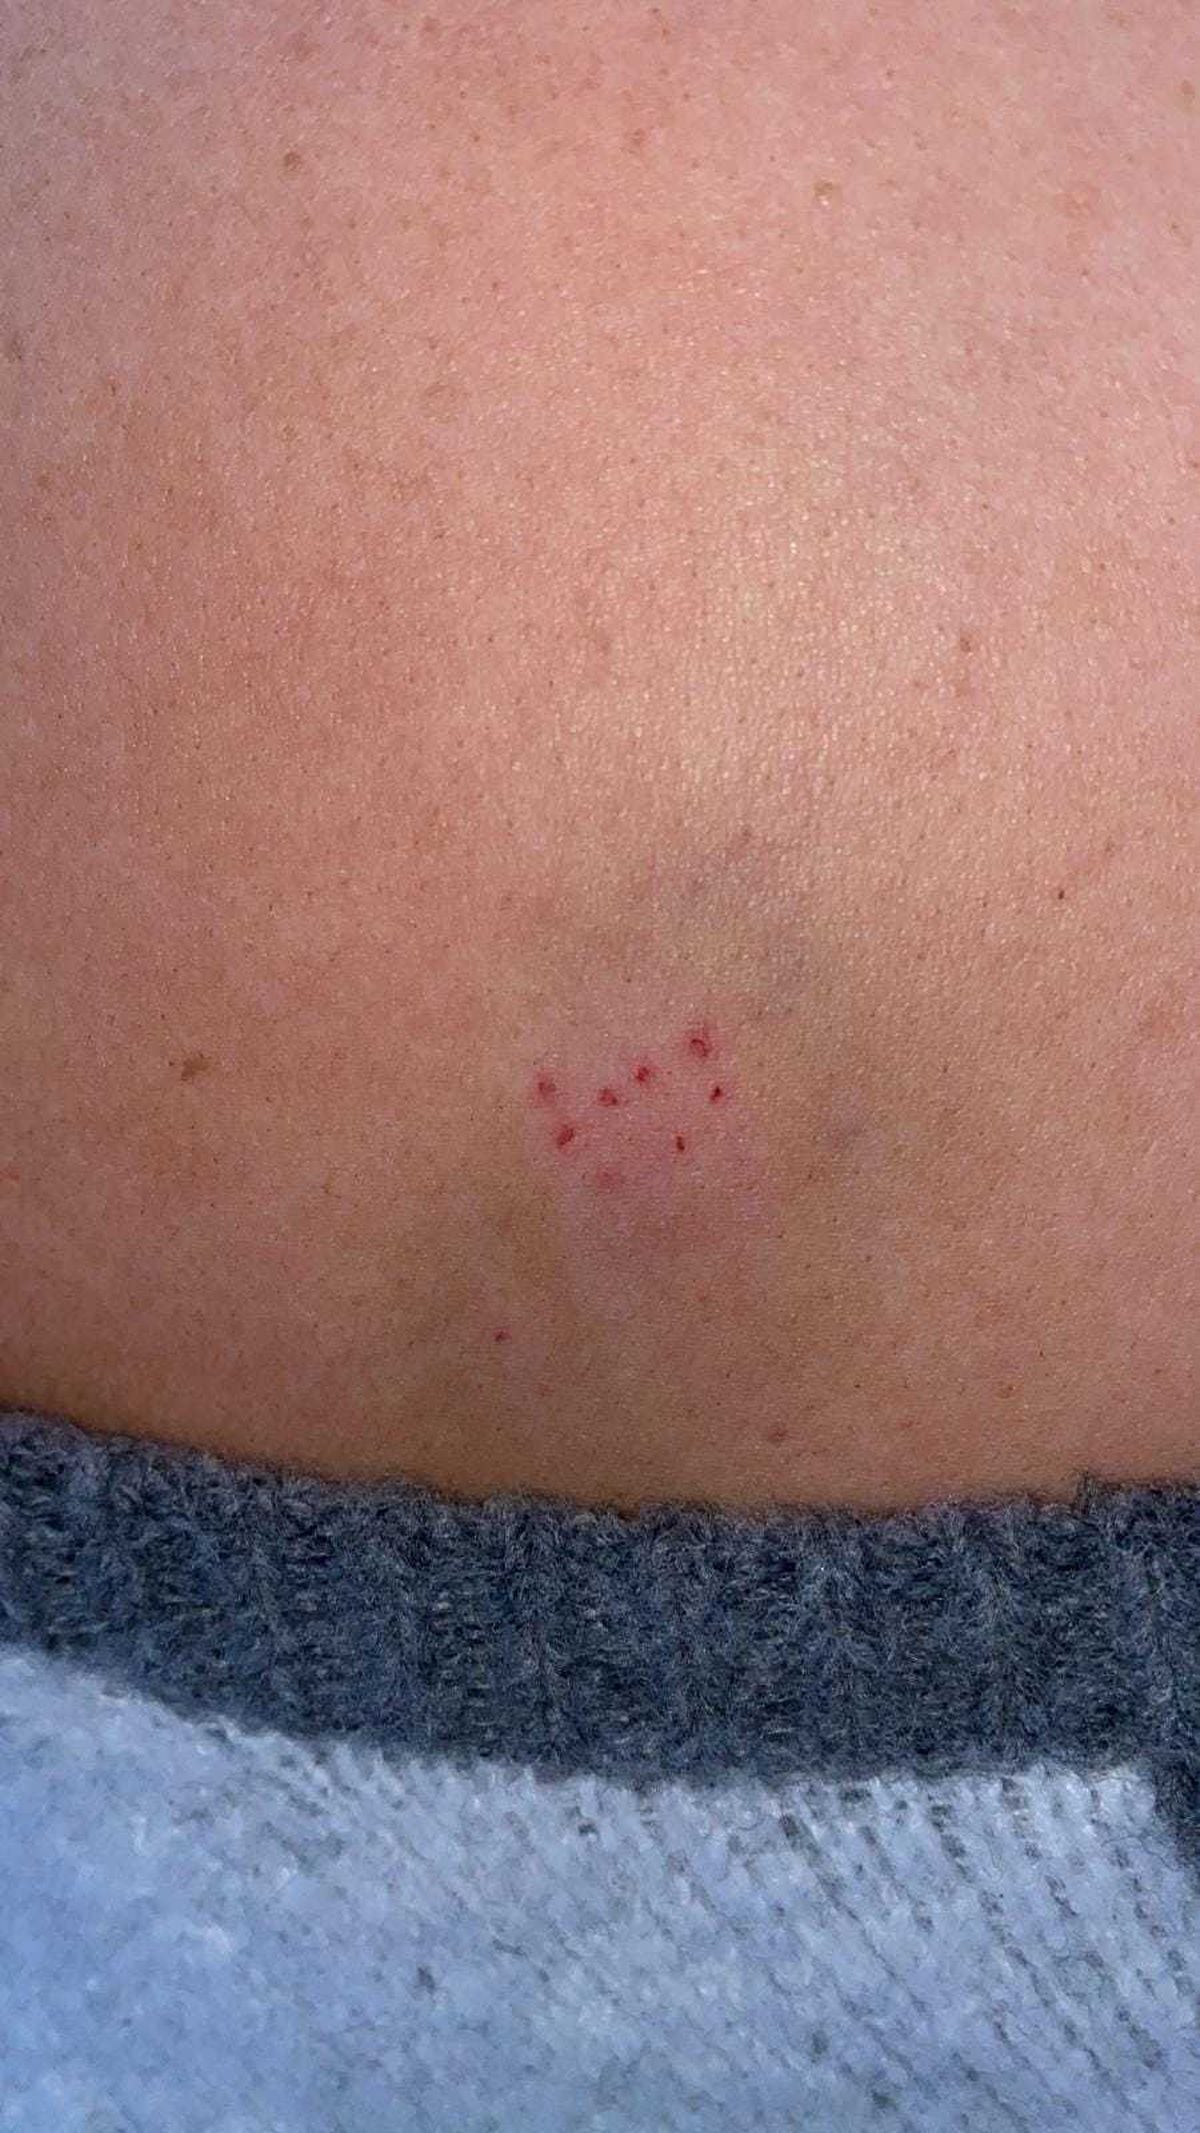 Laura Jones had a mark on her shoulder resembling a needle spiking wound